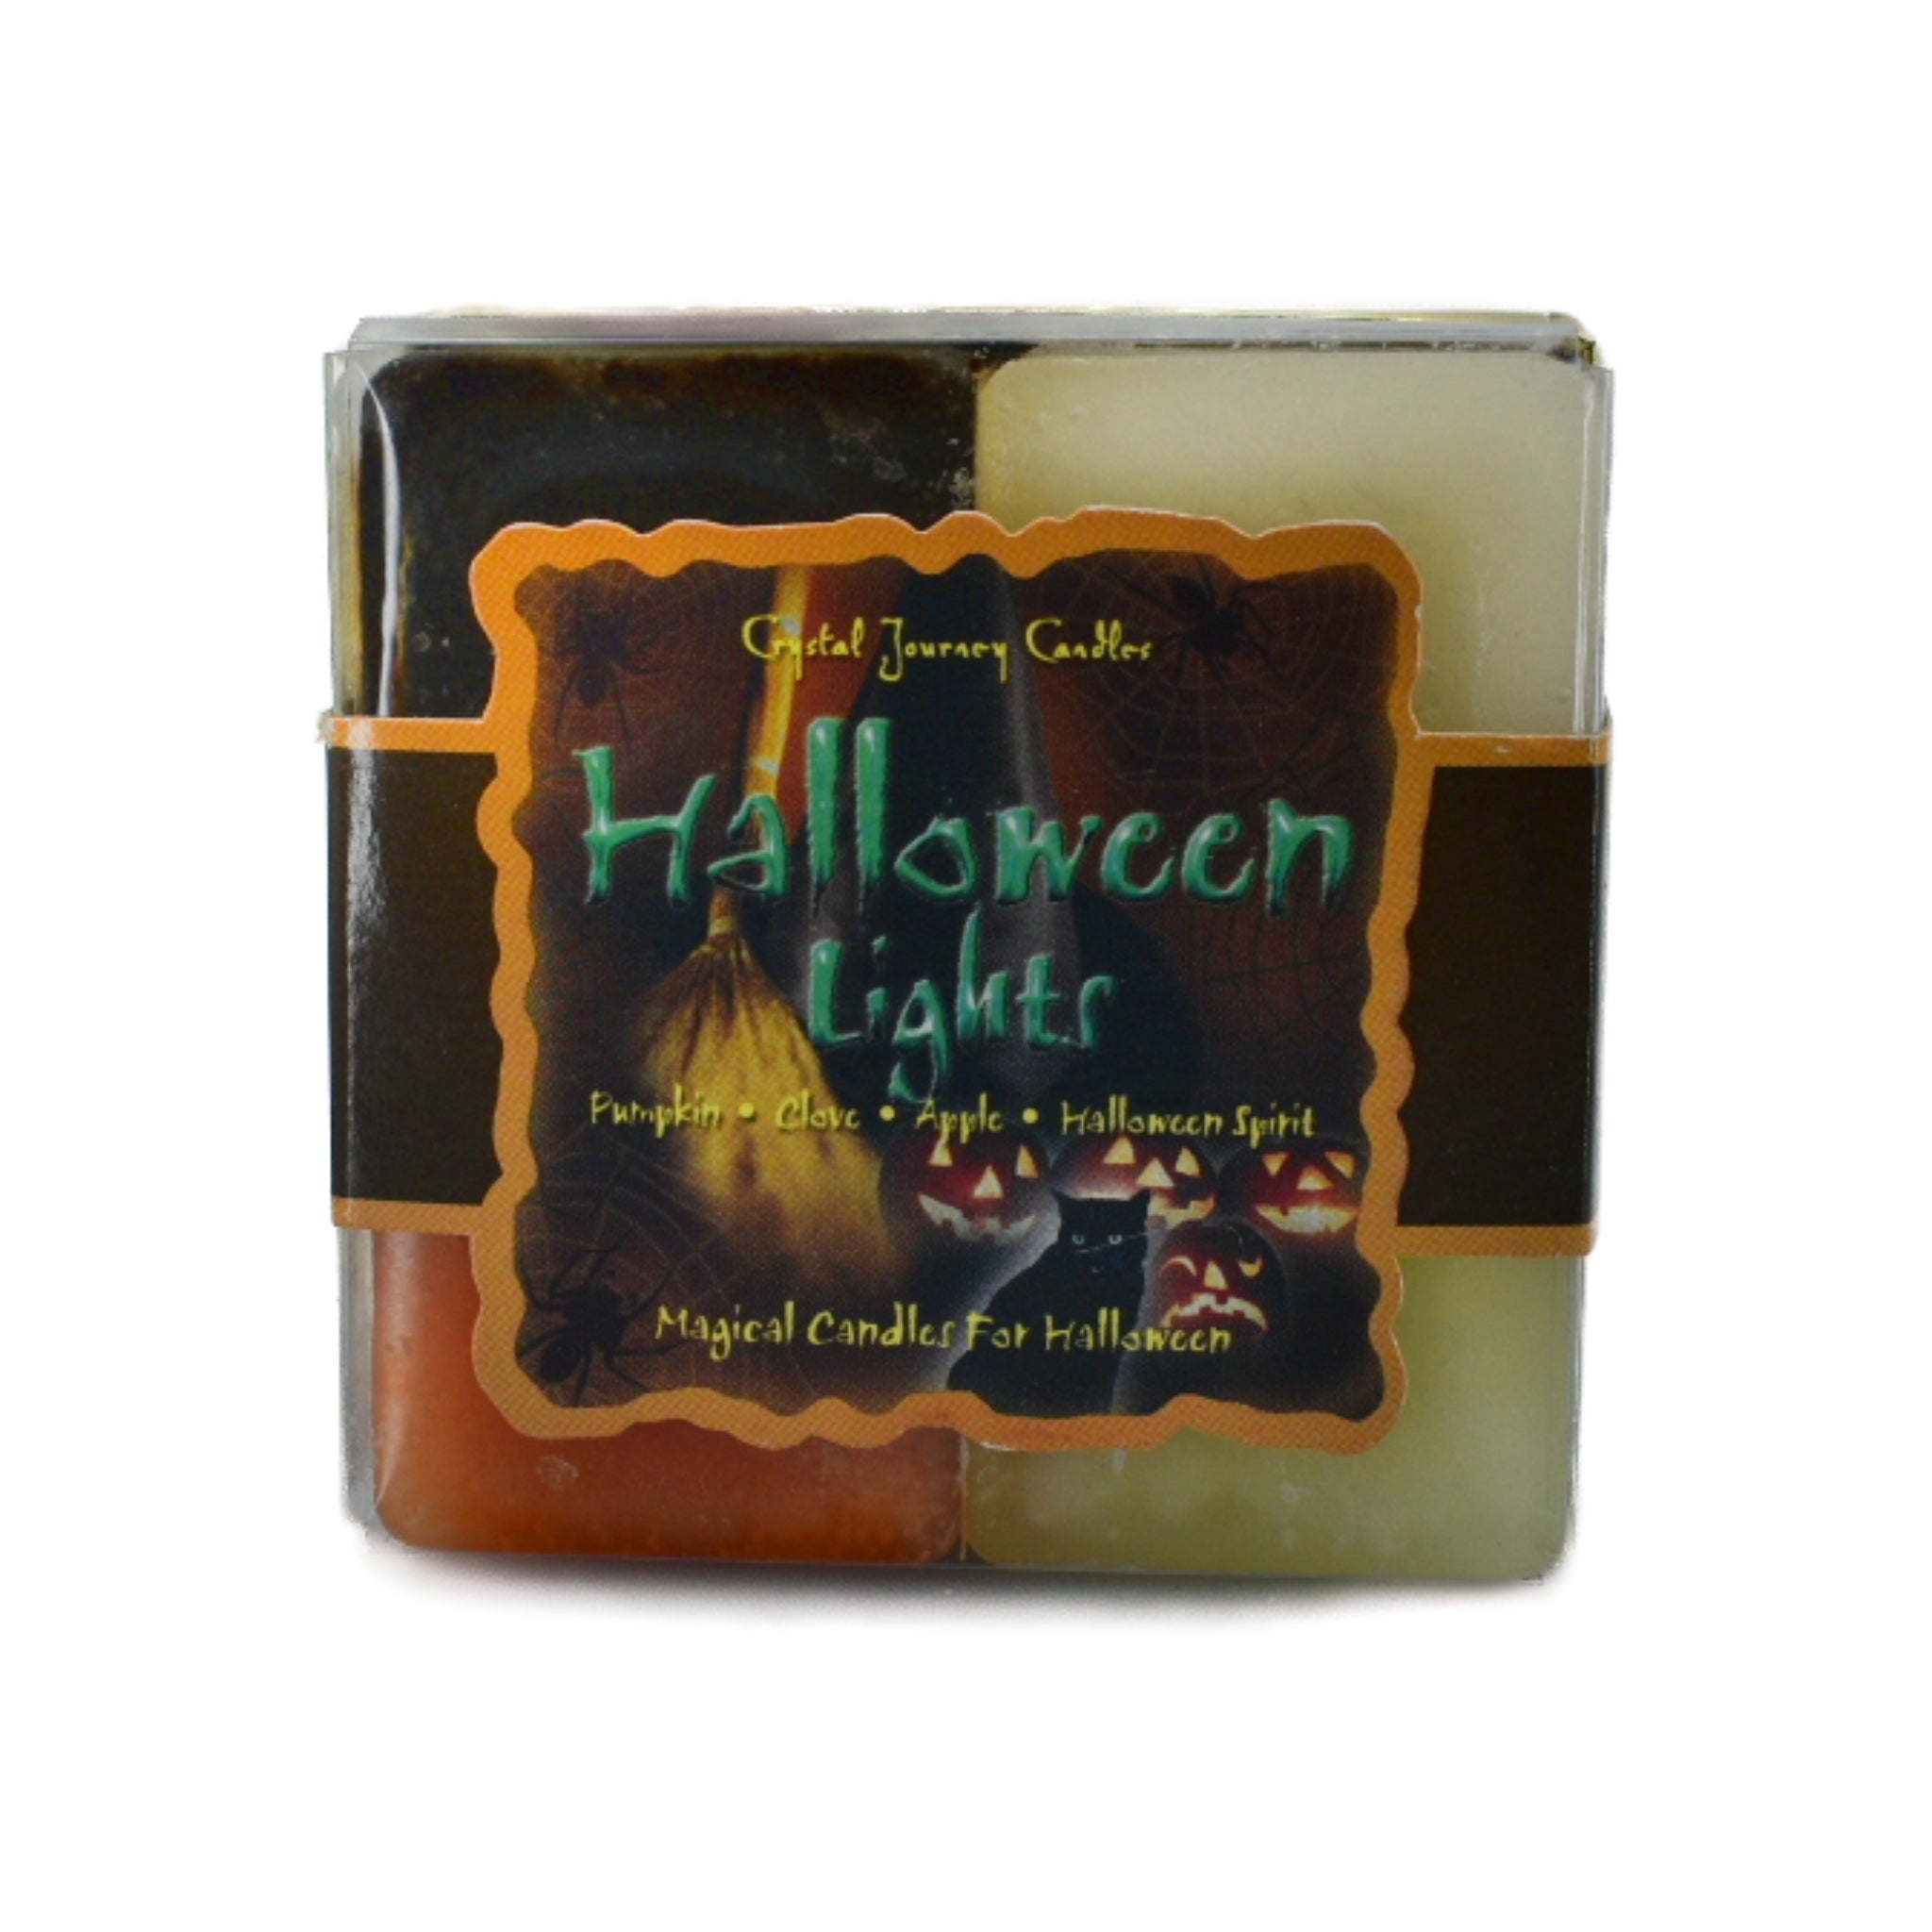 Halloween Square Pack Candle.  Scented apple, pumpkin, clove, and Halloween spirit.  Halloween night celebrates the last day of the ancient Celtic calendar.  The legendary roaming of witches, warlocks, and spirits that illuminate their way.  